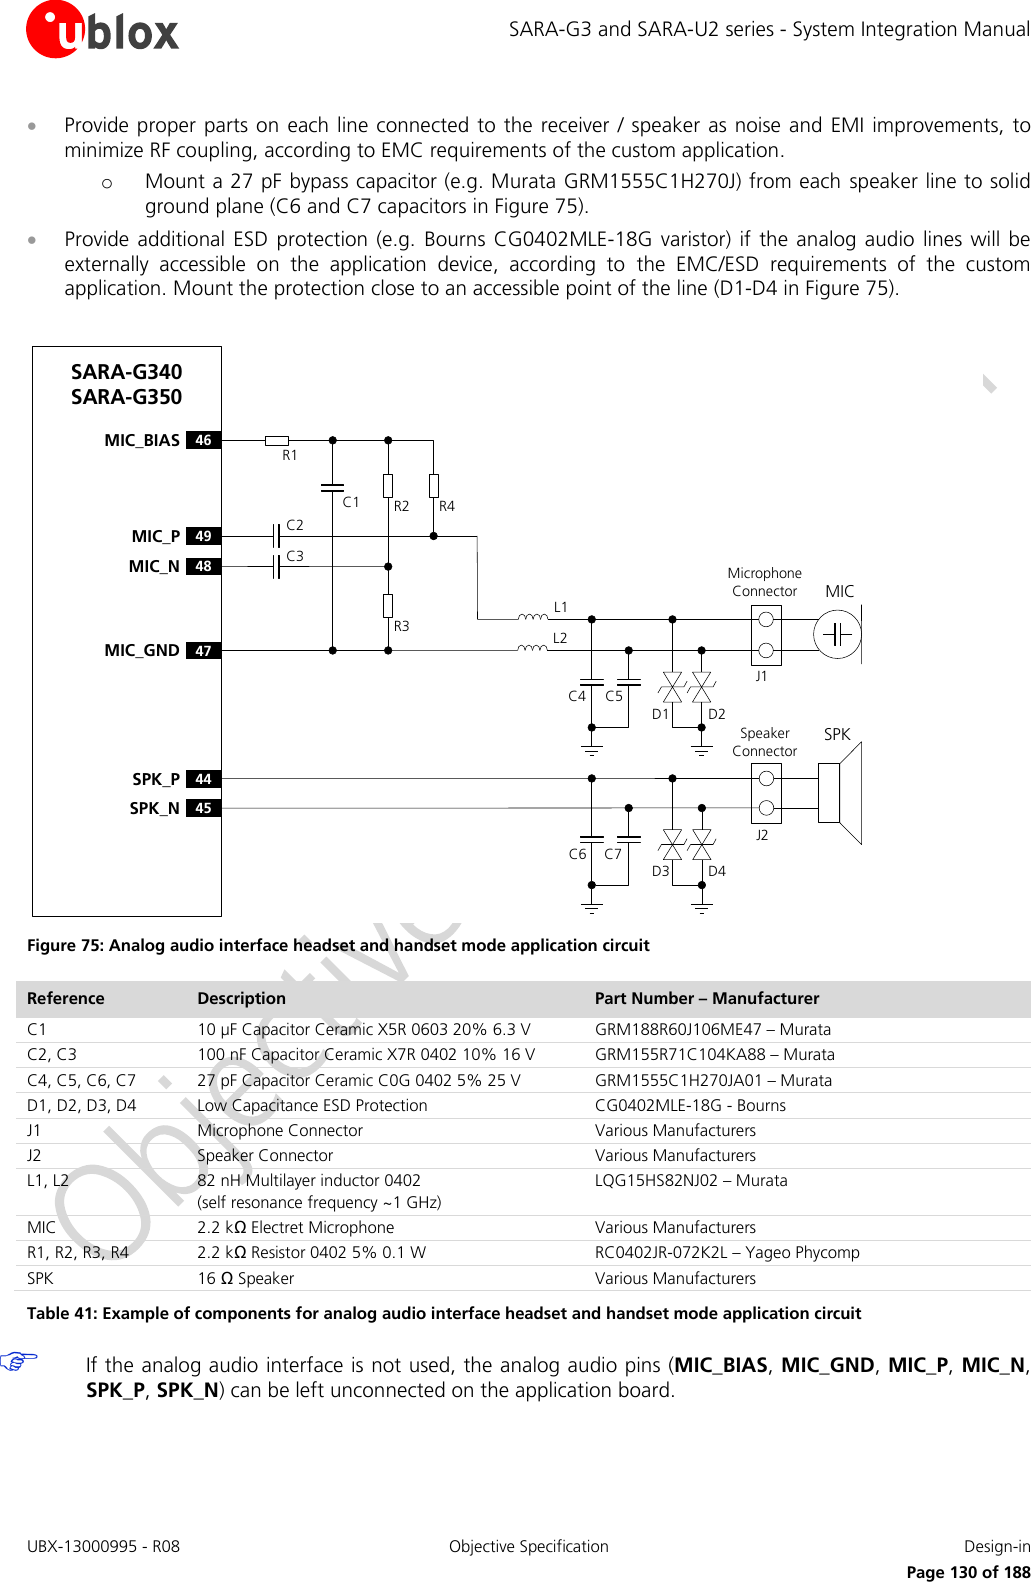 SARA-G3 and SARA-U2 series - System Integration Manual UBX-13000995 - R08  Objective Specification  Design-in     Page 130 of 188  Provide proper parts  on  each line  connected  to the  receiver /  speaker  as noise and EMI  improvements, to minimize RF coupling, according to EMC requirements of the custom application. o Mount a 27 pF bypass capacitor (e.g. Murata GRM1555C1H270J) from each  speaker line to solid ground plane (C6 and C7 capacitors in Figure 75).  Provide  additional ESD  protection (e.g.  Bourns CG0402MLE-18G  varistor)  if the  analog  audio  lines will  be externally  accessible  on  the  application  device,  according  to  the  EMC/ESD  requirements  of  the  custom application. Mount the protection close to an accessible point of the line (D1-D4 in Figure 75).  SARA-G340 SARA-G35049MIC_PR1R2 R444SPK_P48MIC_N45SPK_NR3C146MIC_BIAS47MIC_GNDC2C3D3D1C6 C7L2L1C5C4SPKSpeaker ConnectorJ2Microphone Connector MICJ1D4D2 Figure 75: Analog audio interface headset and handset mode application circuit Reference Description Part Number – Manufacturer C1 10 µF Capacitor Ceramic X5R 0603 20% 6.3 V GRM188R60J106ME47 – Murata C2, C3 100 nF Capacitor Ceramic X7R 0402 10% 16 V GRM155R71C104KA88 – Murata C4, C5, C6, C7 27 pF Capacitor Ceramic C0G 0402 5% 25 V  GRM1555C1H270JA01 – Murata D1, D2, D3, D4 Low Capacitance ESD Protection CG0402MLE-18G - Bourns J1 Microphone Connector Various Manufacturers  J2 Speaker Connector Various Manufacturers  L1, L2 82 nH Multilayer inductor 0402 (self resonance frequency ~1 GHz) LQG15HS82NJ02 – Murata MIC 2.2 kΩ Electret Microphone Various Manufacturers R1, R2, R3, R4 2.2 kΩ Resistor 0402 5% 0.1 W  RC0402JR-072K2L – Yageo Phycomp SPK 16 Ω Speaker  Various Manufacturers Table 41: Example of components for analog audio interface headset and handset mode application circuit  If the analog audio interface is not used, the analog audio pins (MIC_BIAS, MIC_GND, MIC_P, MIC_N, SPK_P, SPK_N) can be left unconnected on the application board.  